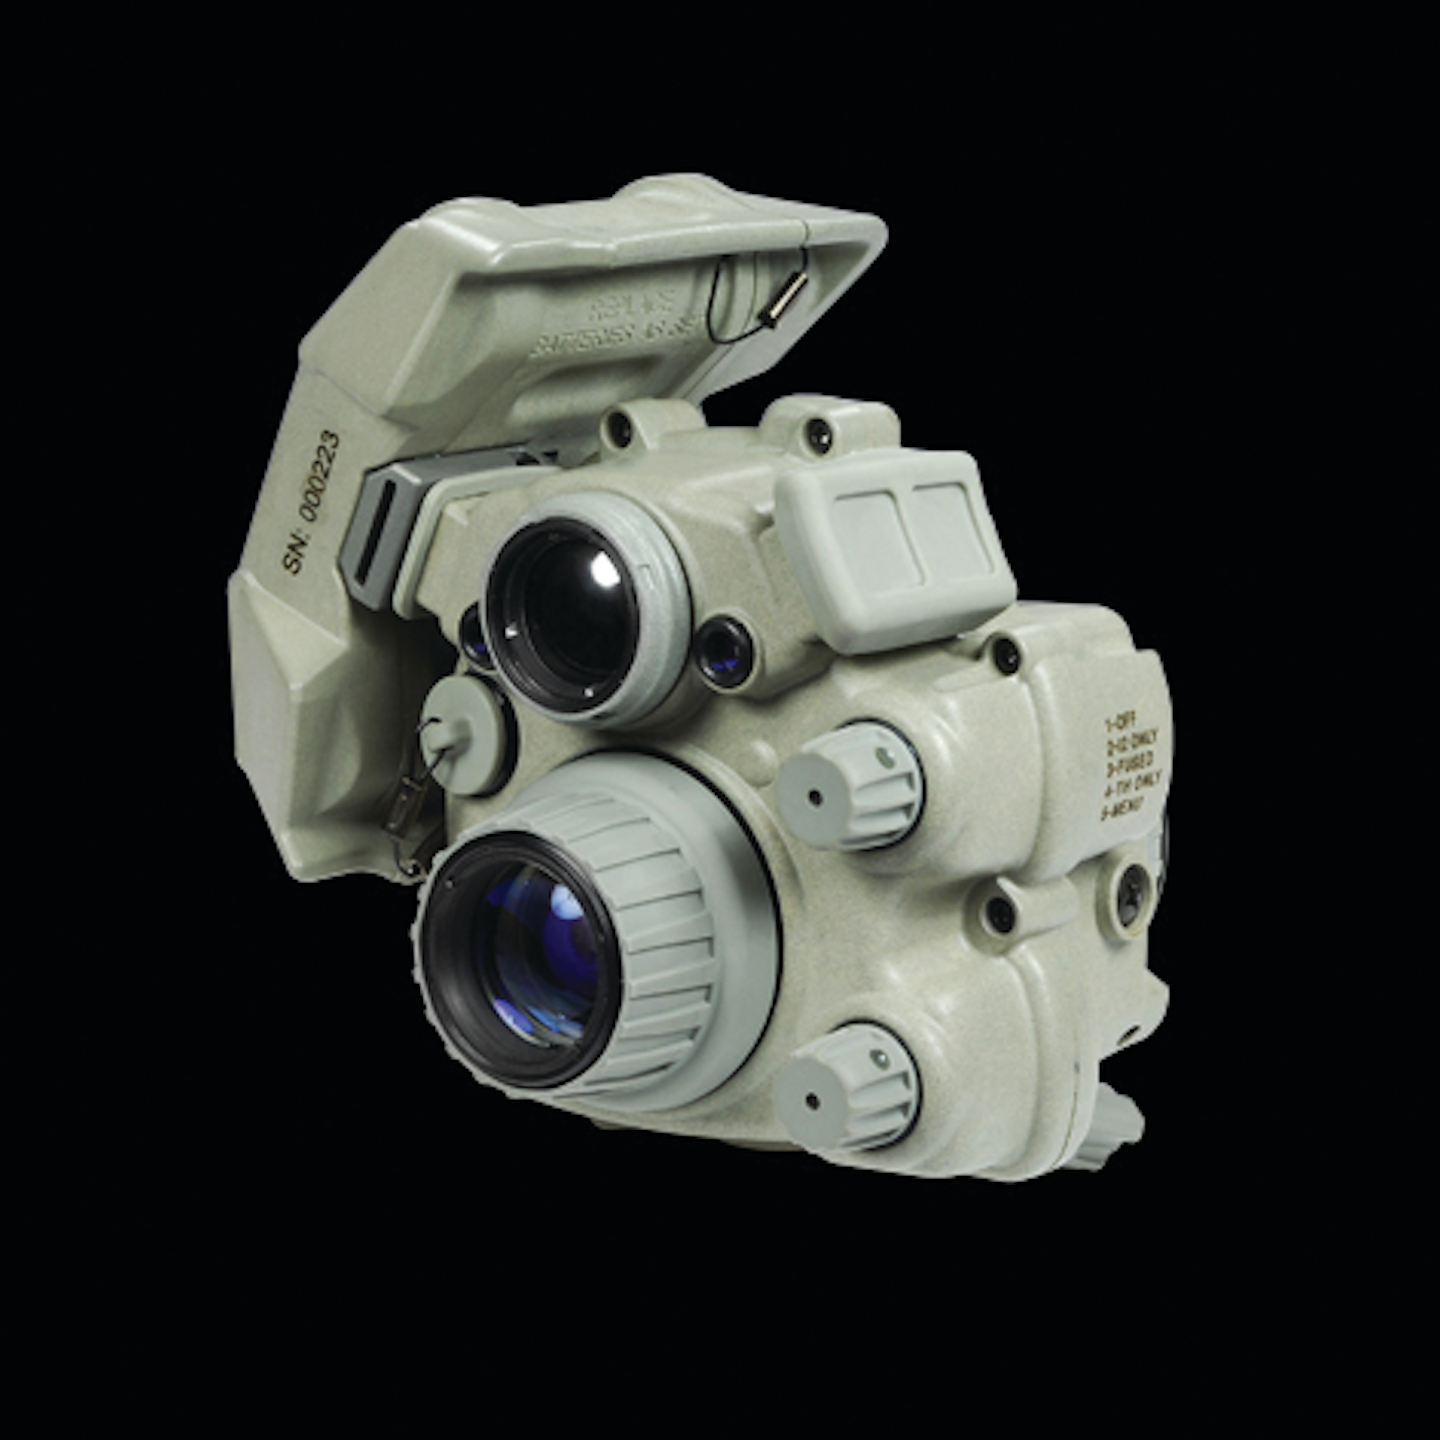 AN/PSQ-20B Monocular Fusion From: Morovision Night Vision Inc. | Officer